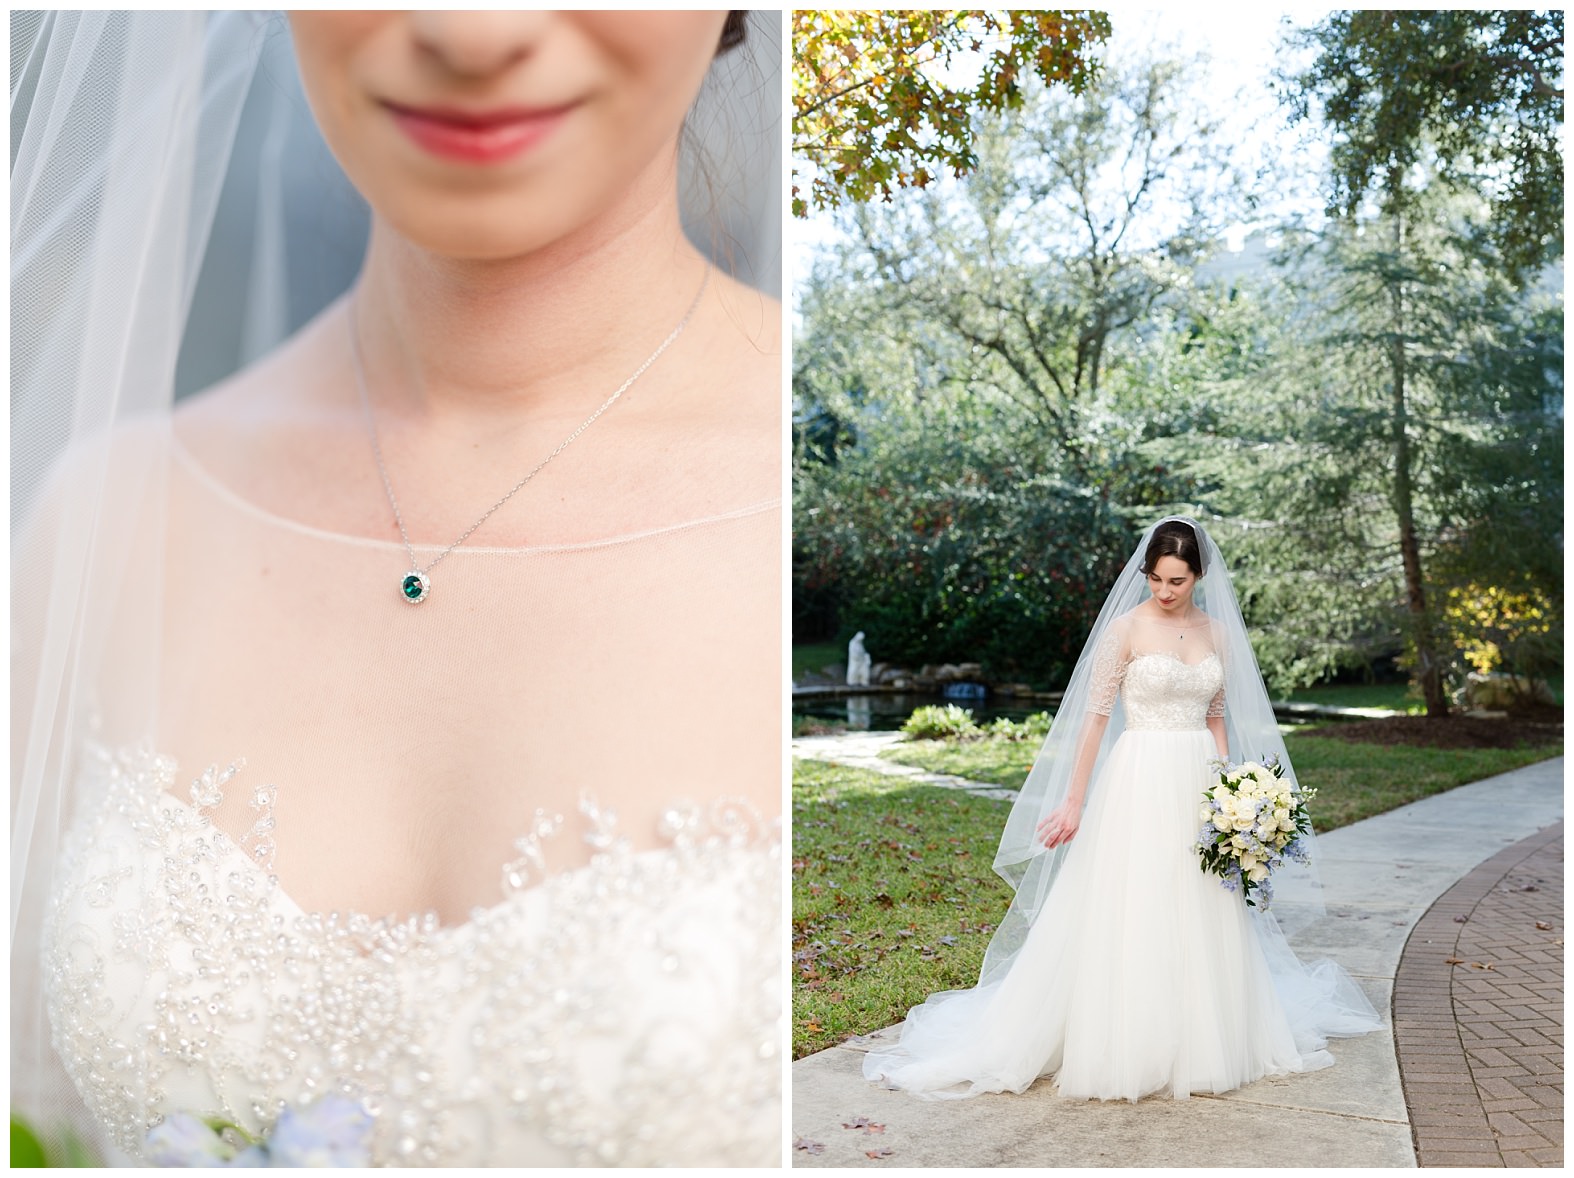 A Classic Winter Wedding in cream and emerald at Hoffman Ranch and Our lady of atonement in San Antonio Texas by Splendored Photography